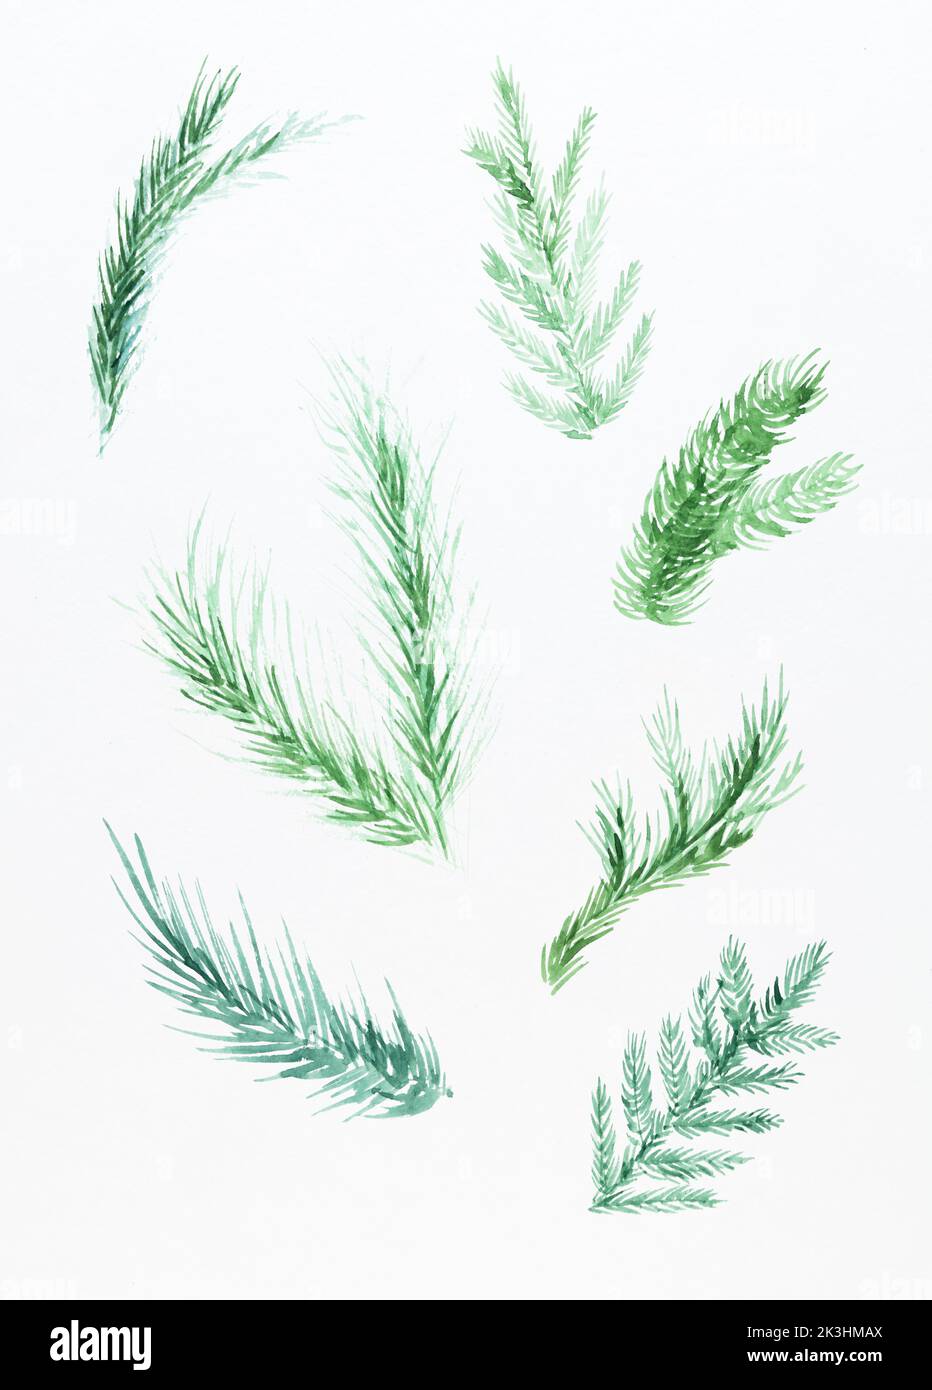 Pine, spruce, fir tree branches, winter nature clipart. A set of Christmas decorations from fir branches painted in watercolor on white paper. Stock Photo